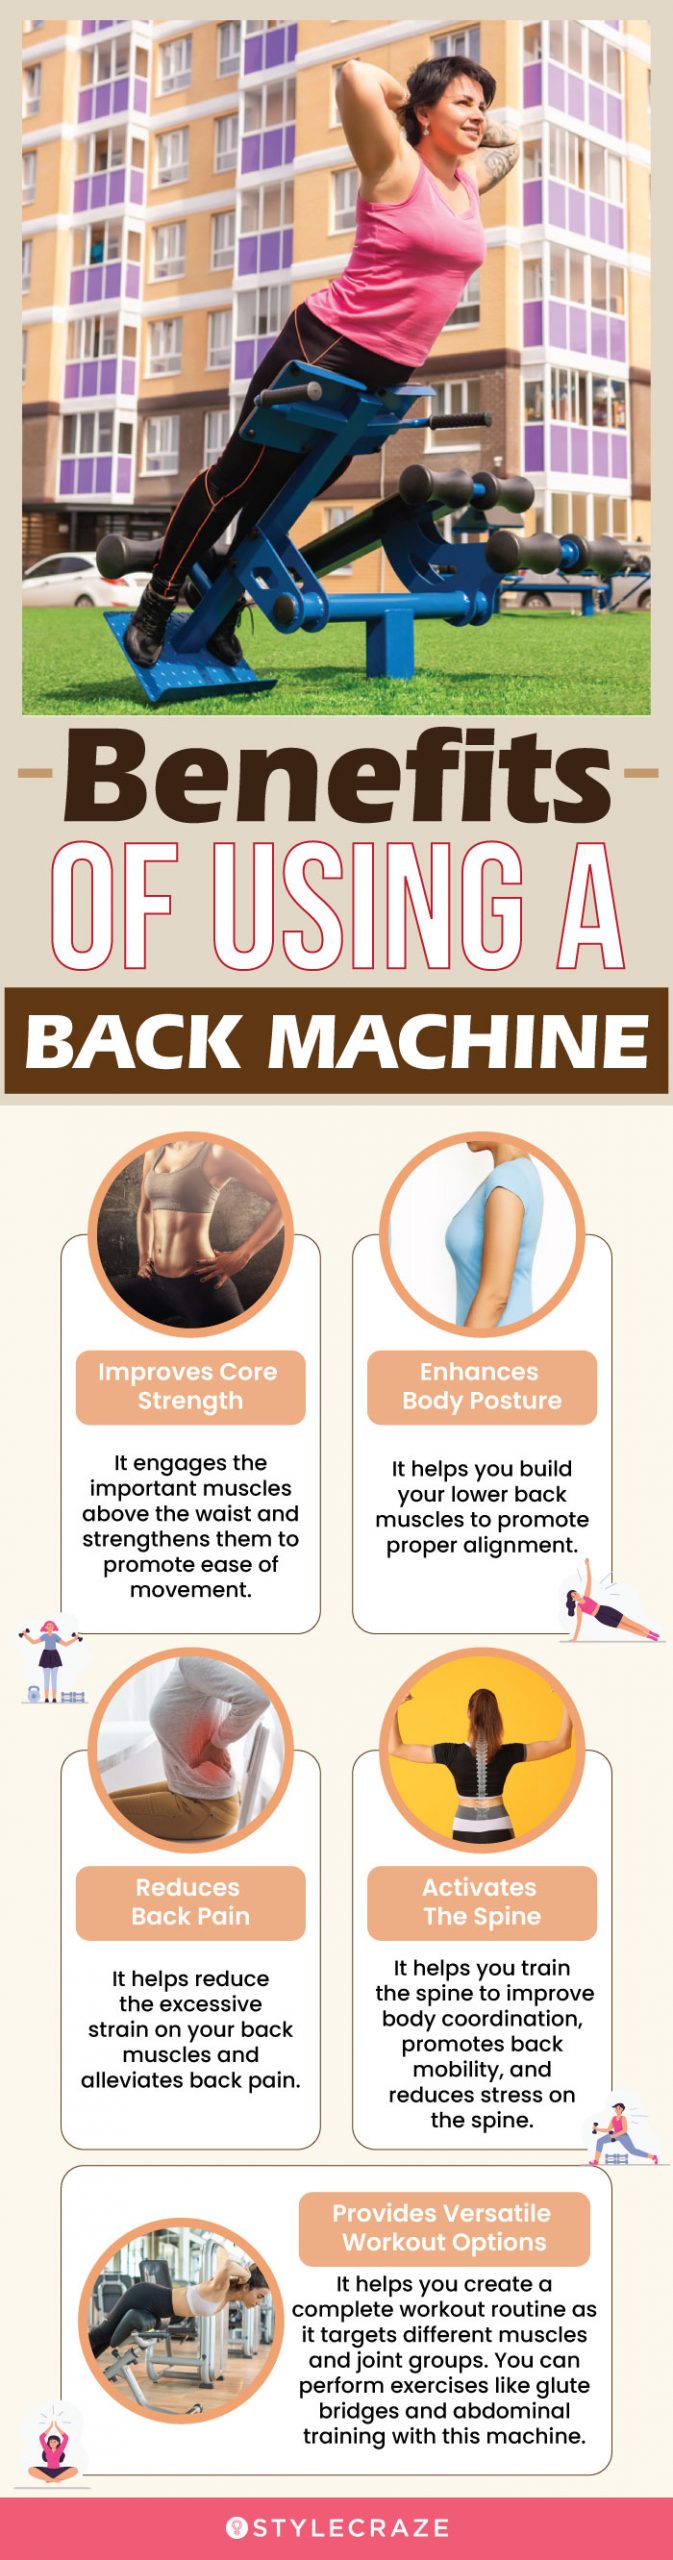 Benefits Of Using A Back Machine (infographic)